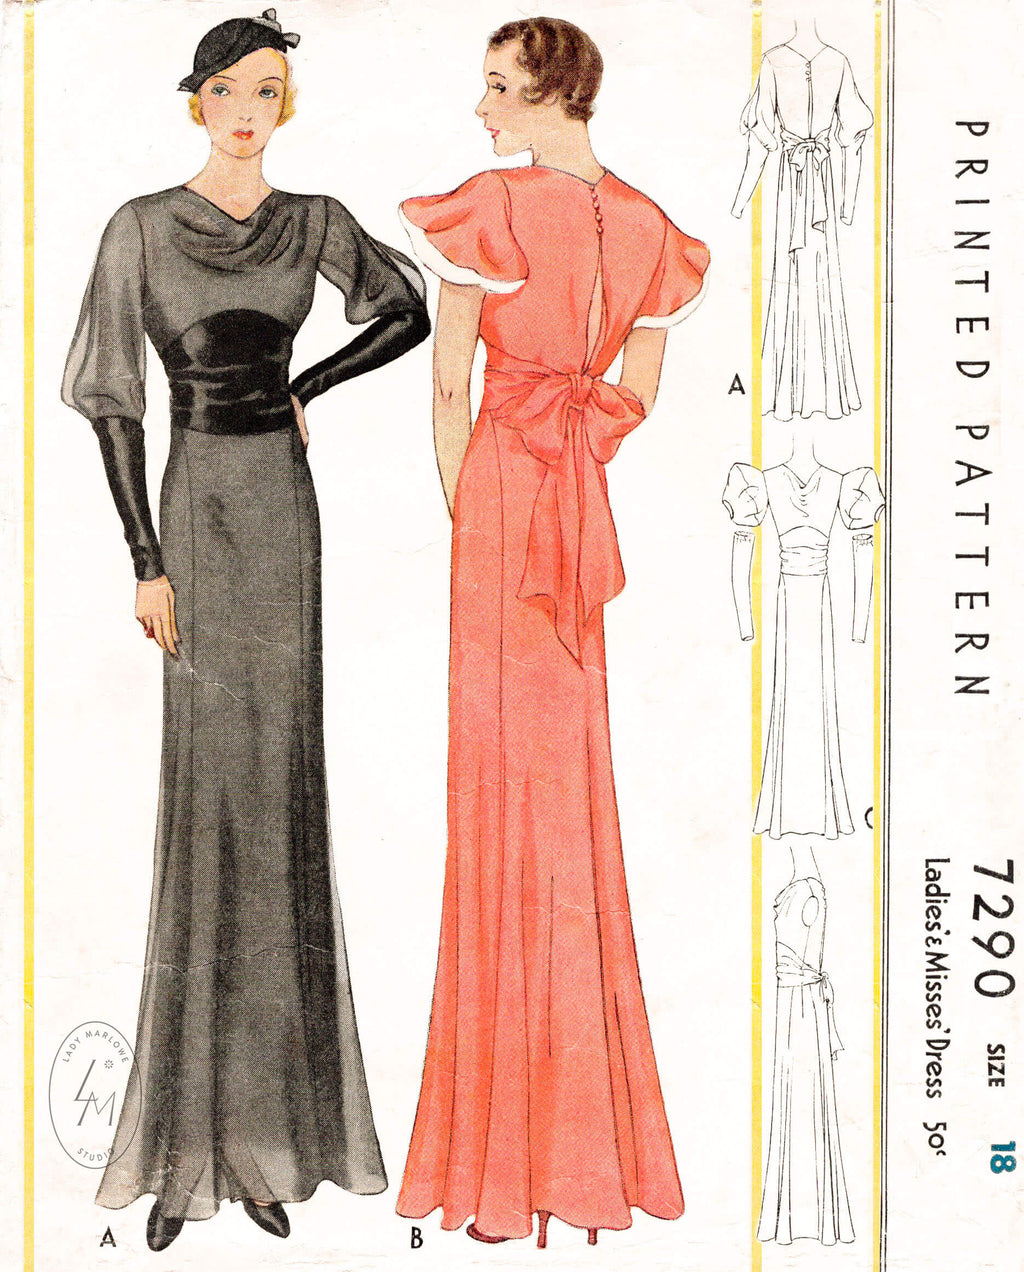 Simplicity 3619-Vintage Style 1930s Evening Gown Sewing Pattern Uncut FF D5  4-12 | eBay